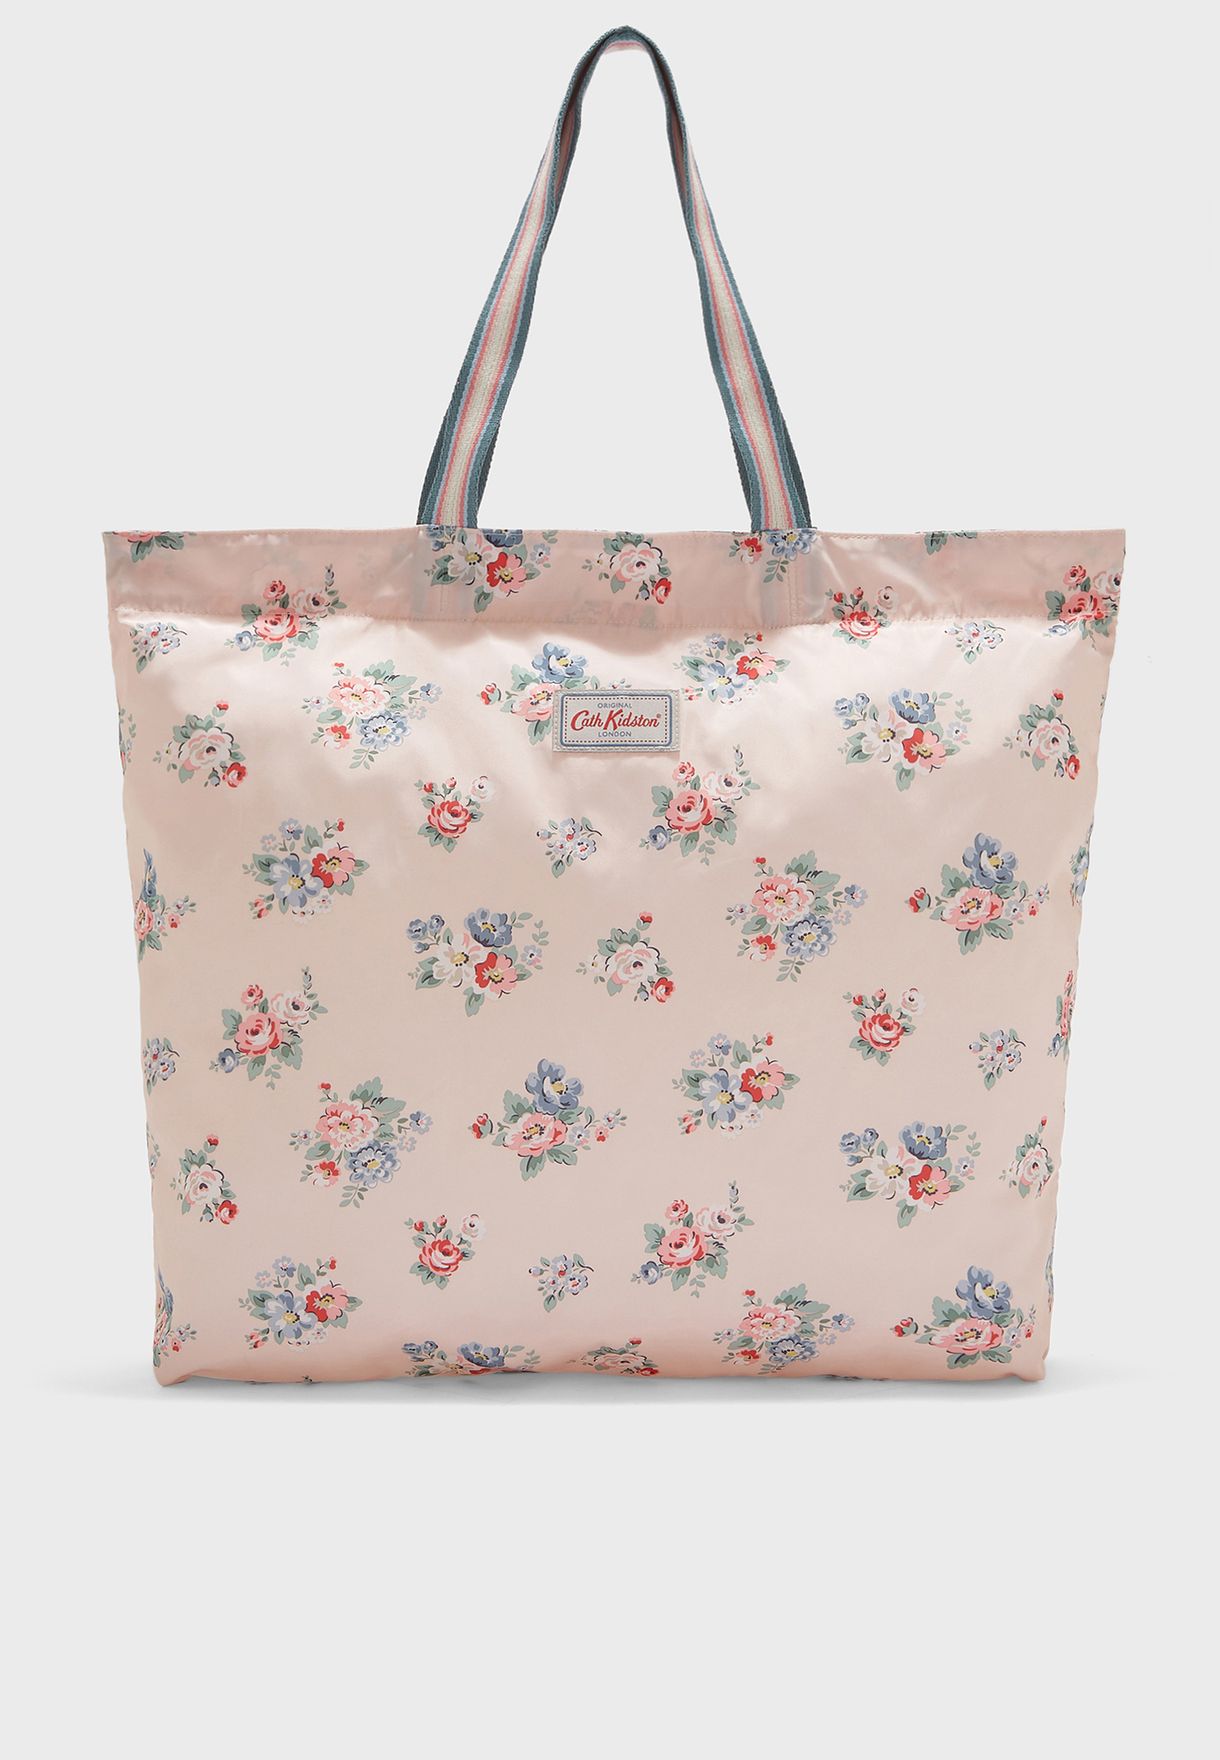 cath kidston foldable bag official 